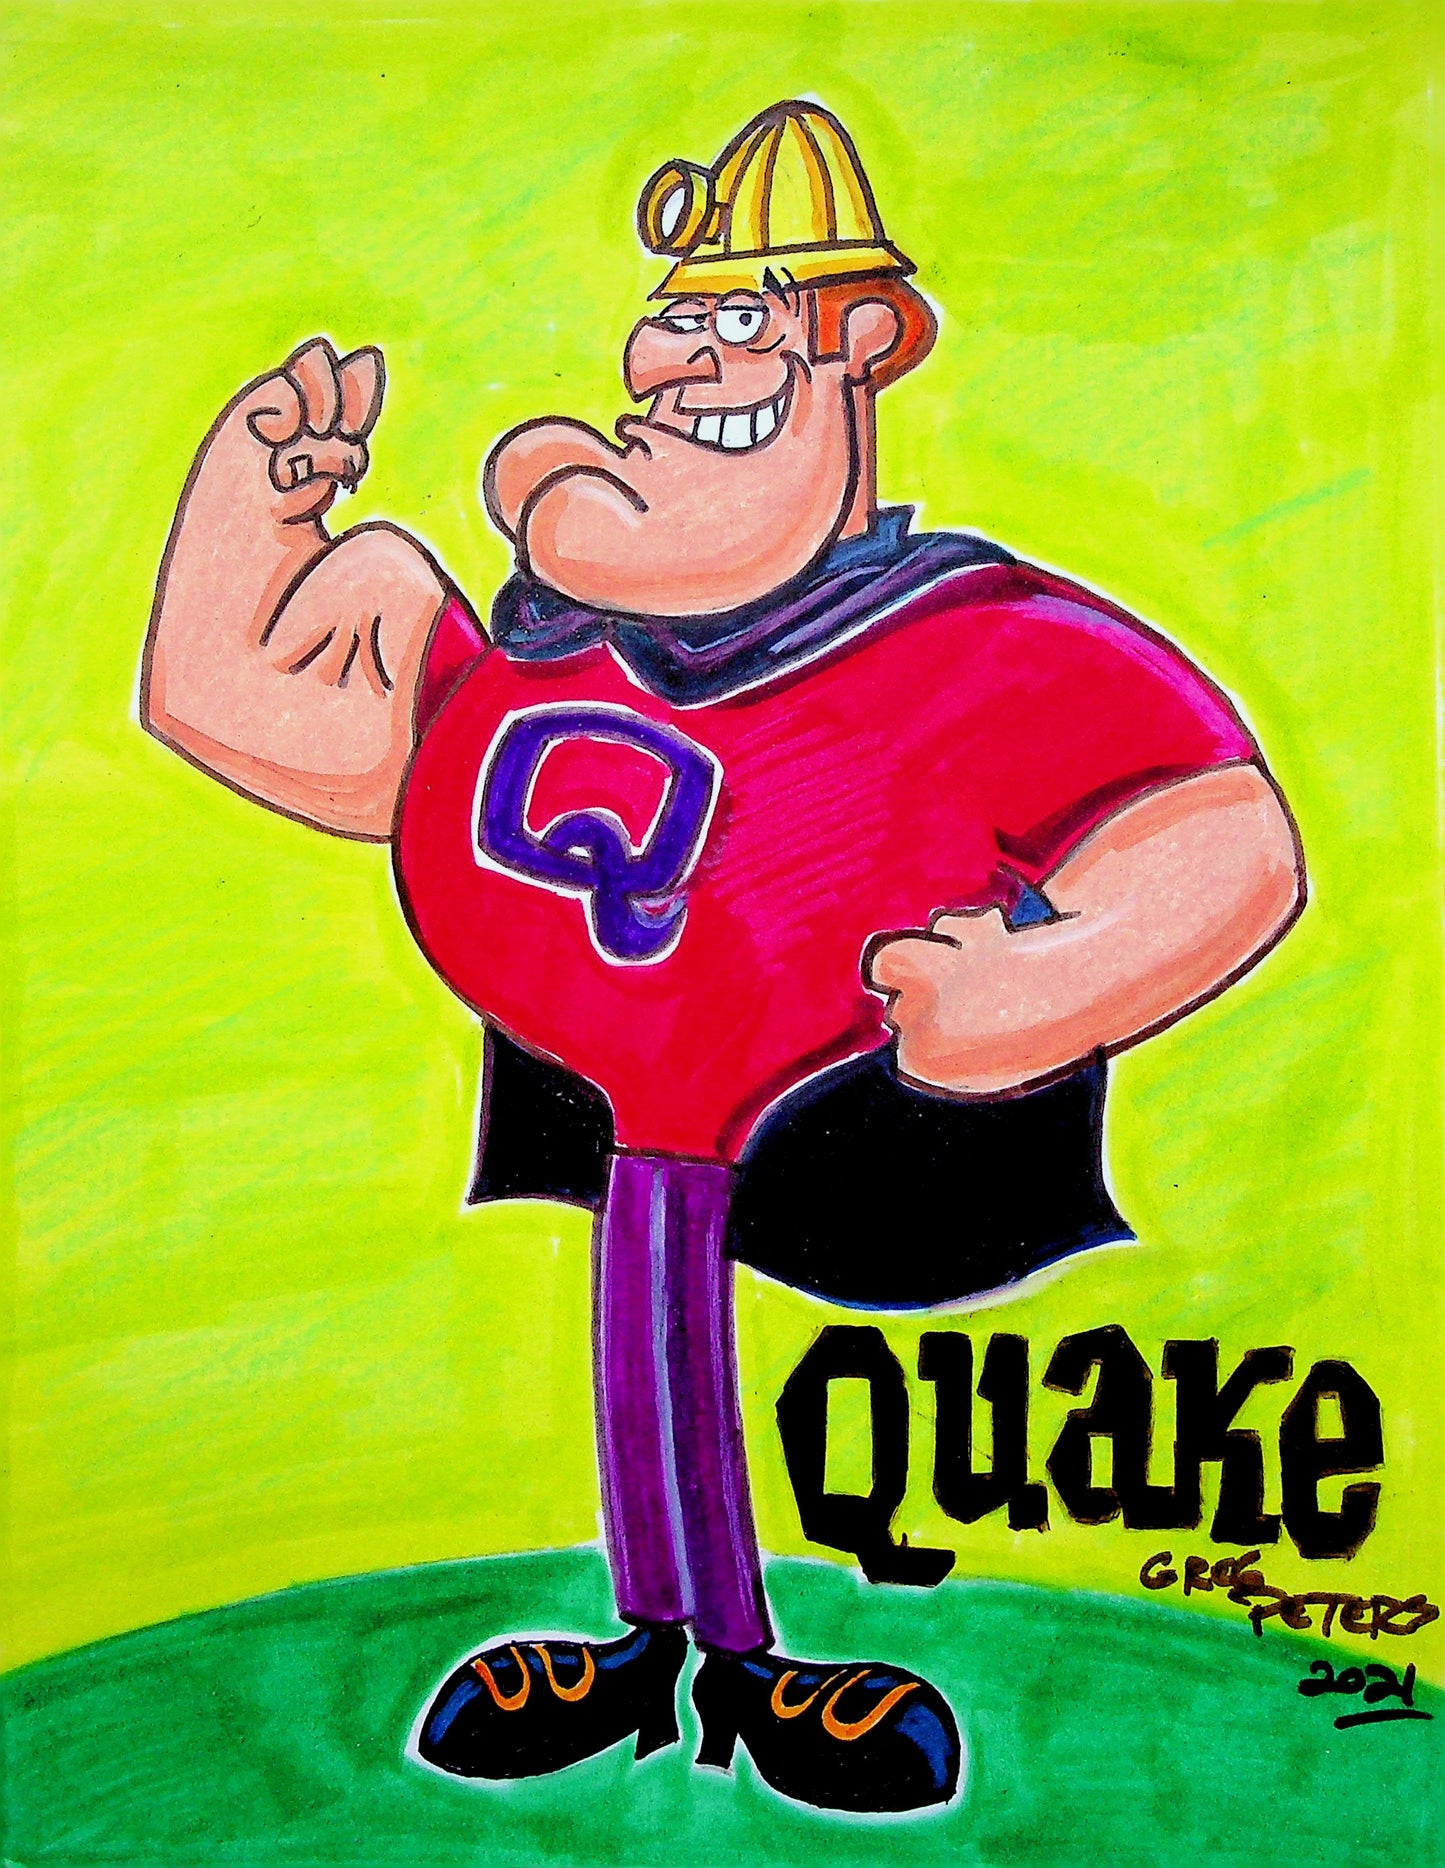 Greg Peters Signed QUAKE Hand Painted Animation Art